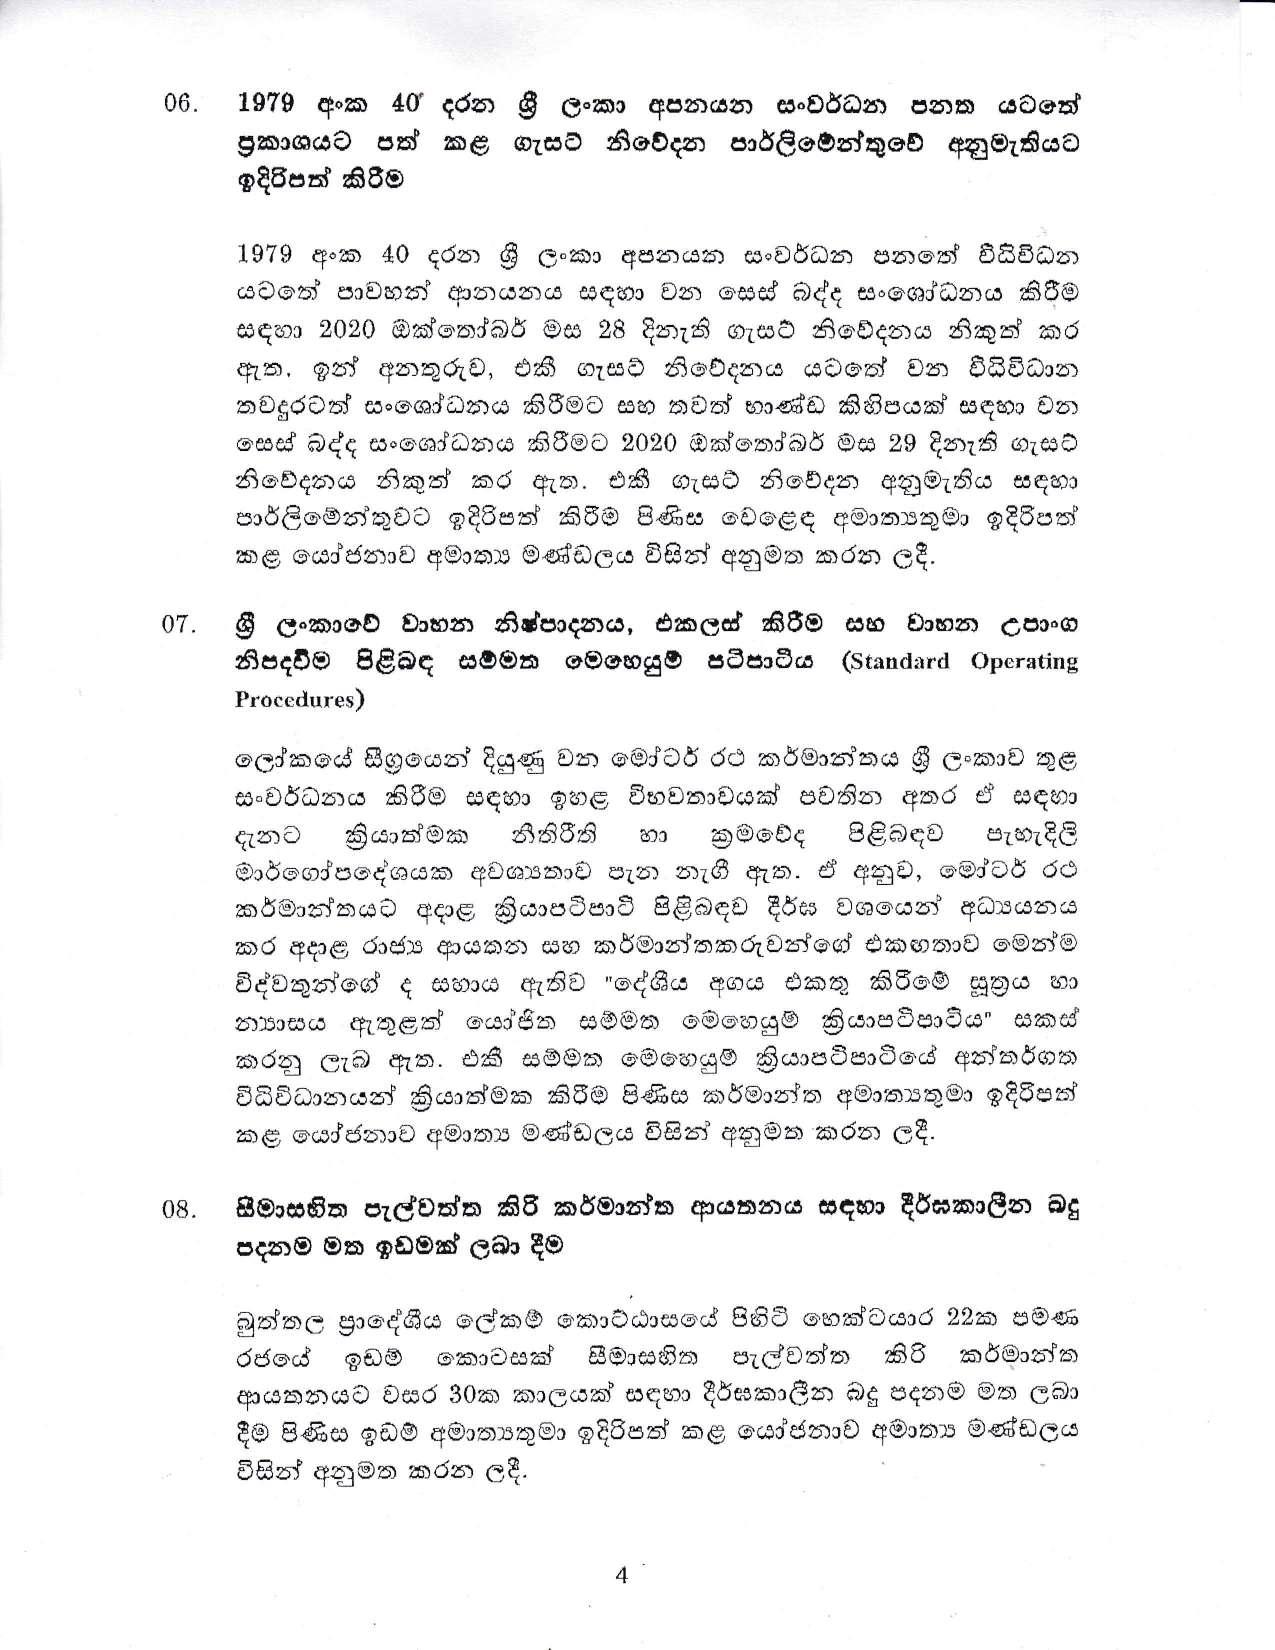 Cabinet Decision on 11.01.2021 page 004